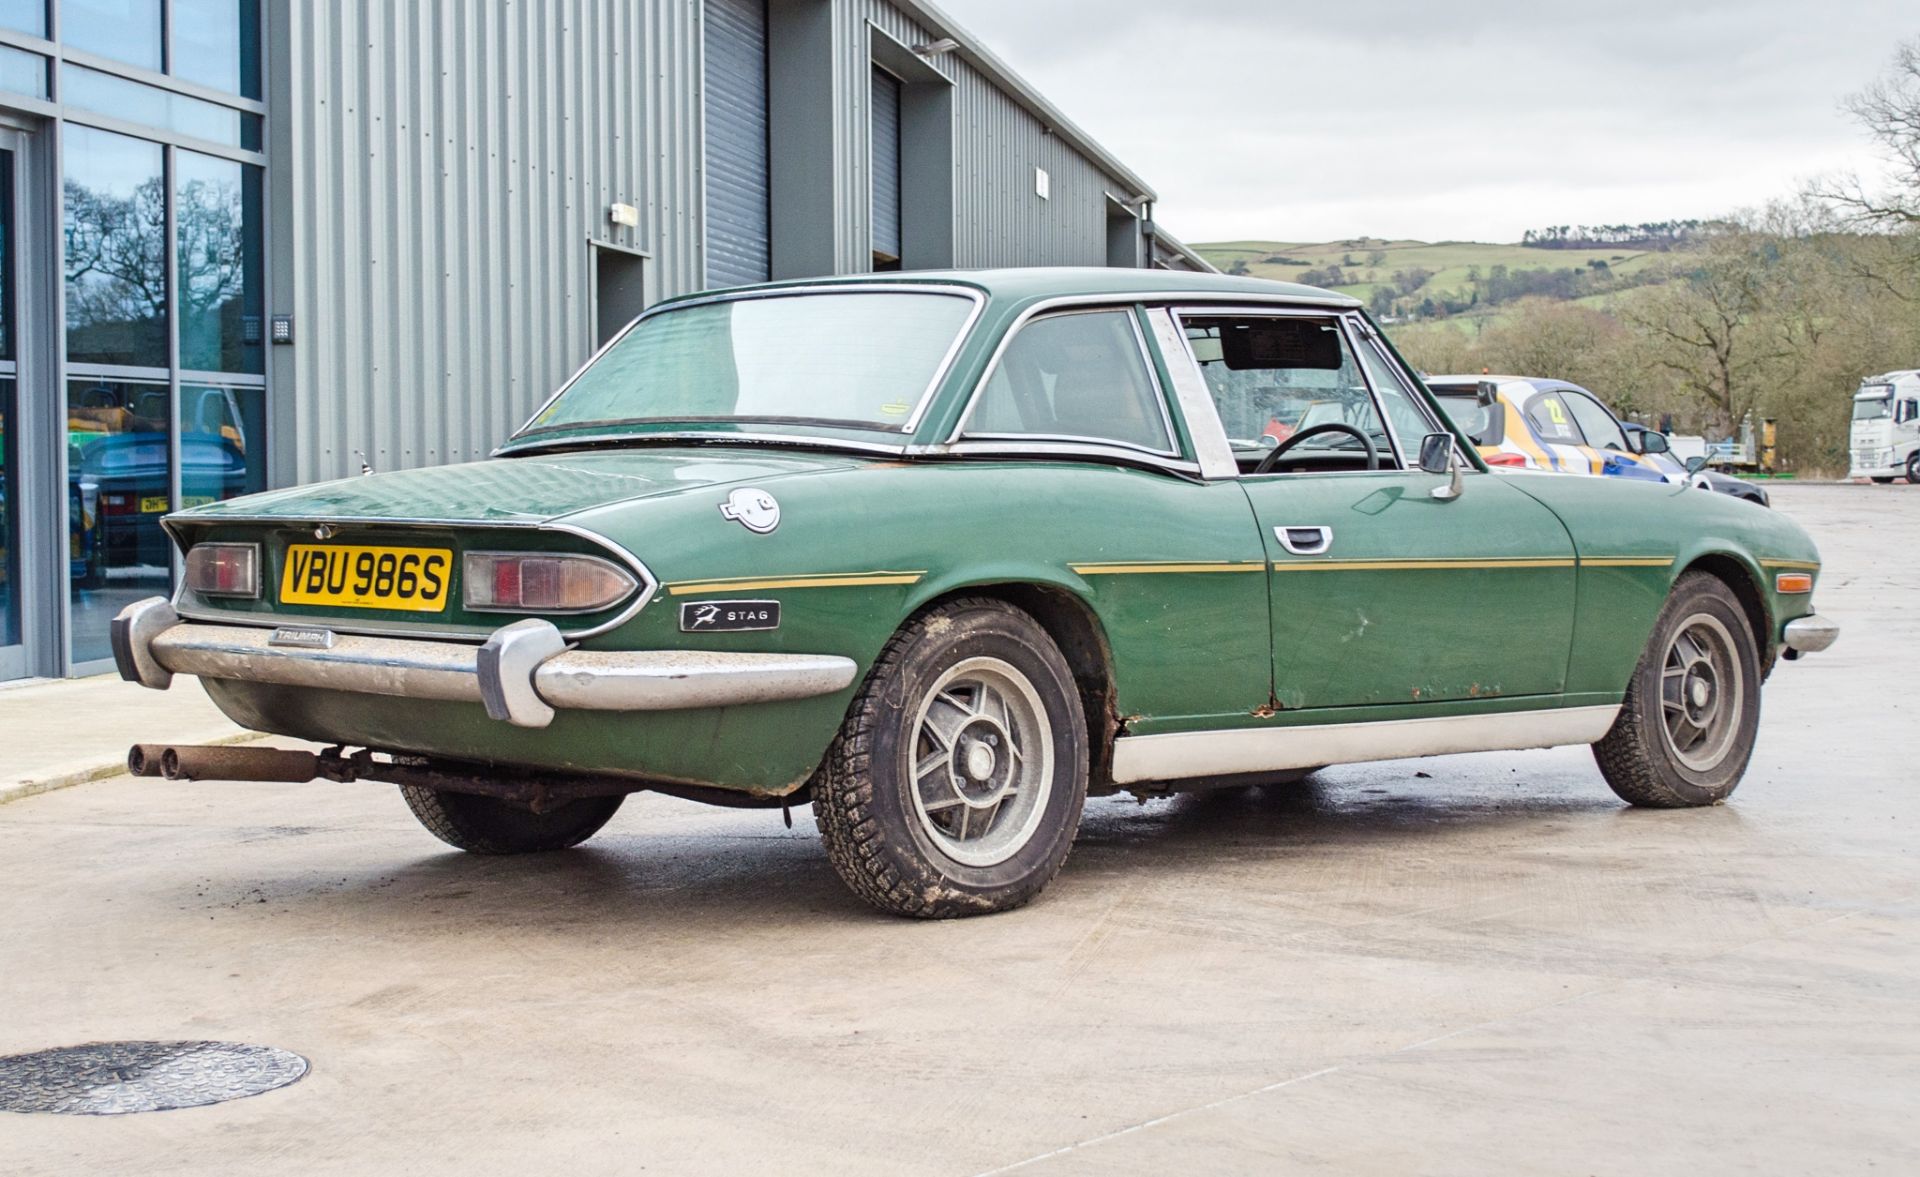 1978 Triumph Stag 3 litre manual 2 door convertible Barn Find - Image 5 of 57